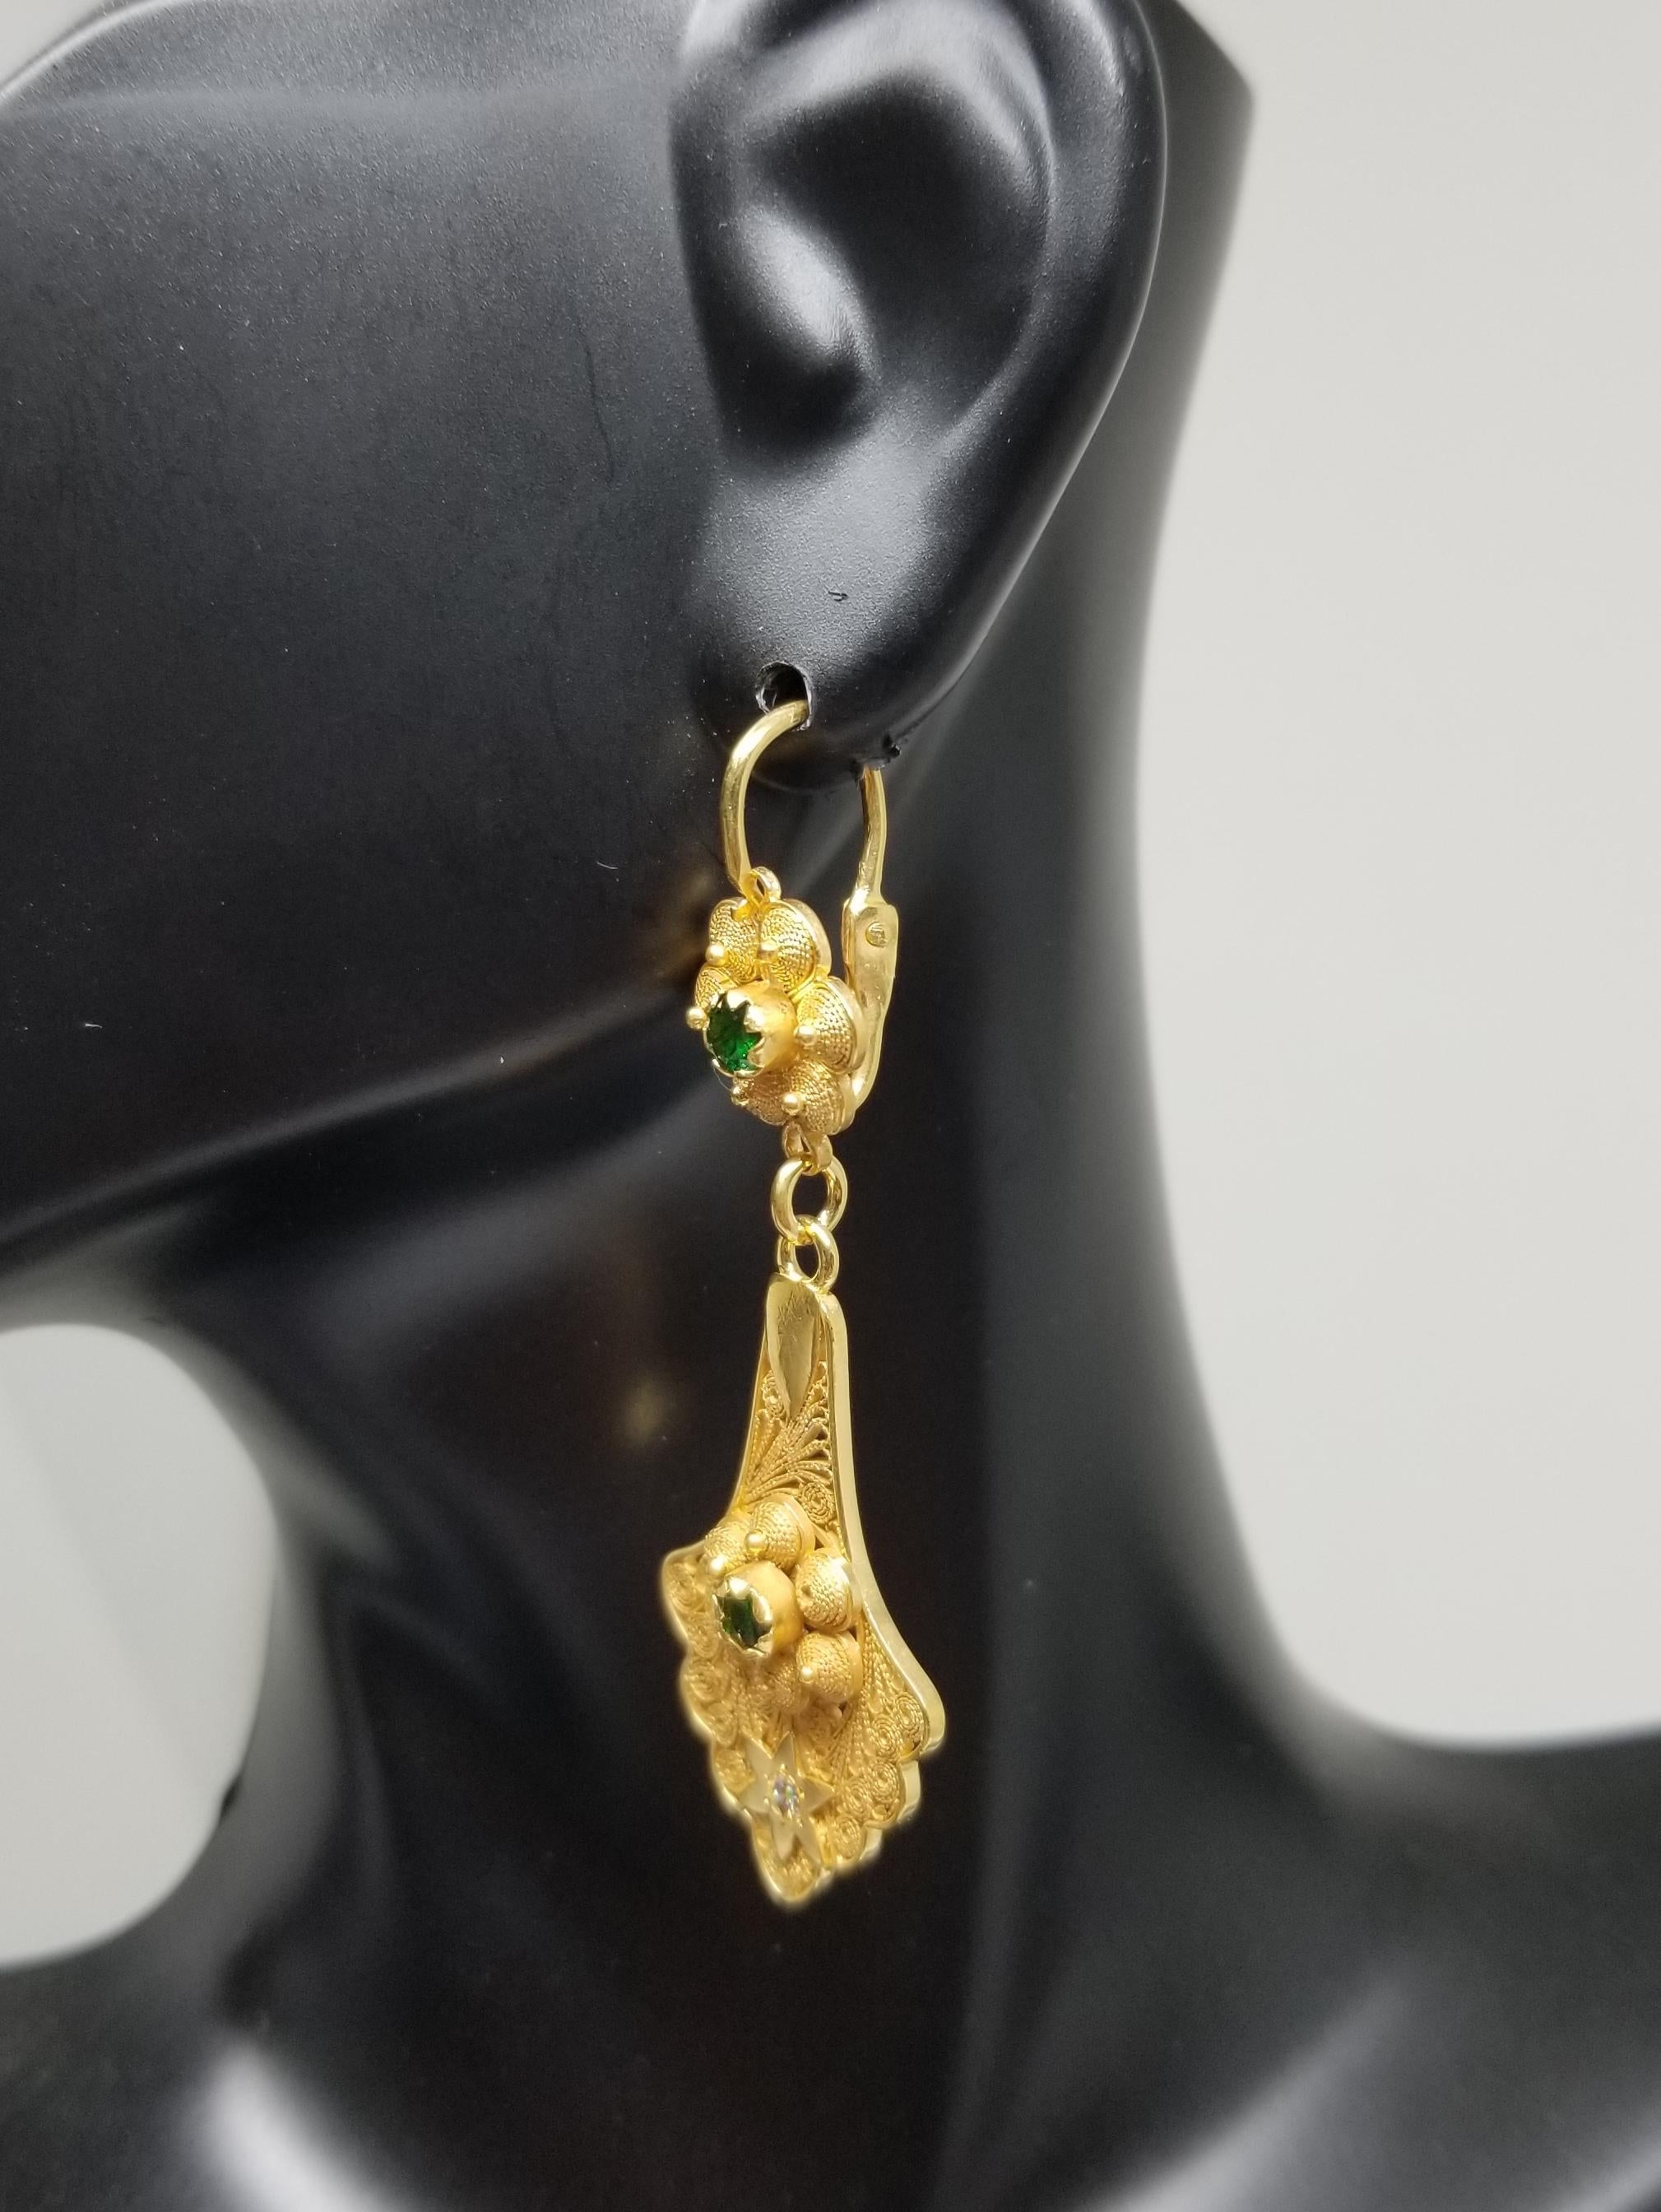 Diamond and Tsavortie Dangle Earrings, containing 2 round diamonds weighing .09pts. and 2 tsavorite weighing .66pts. set in an 18k yellow gold plated filigree dangle setting.